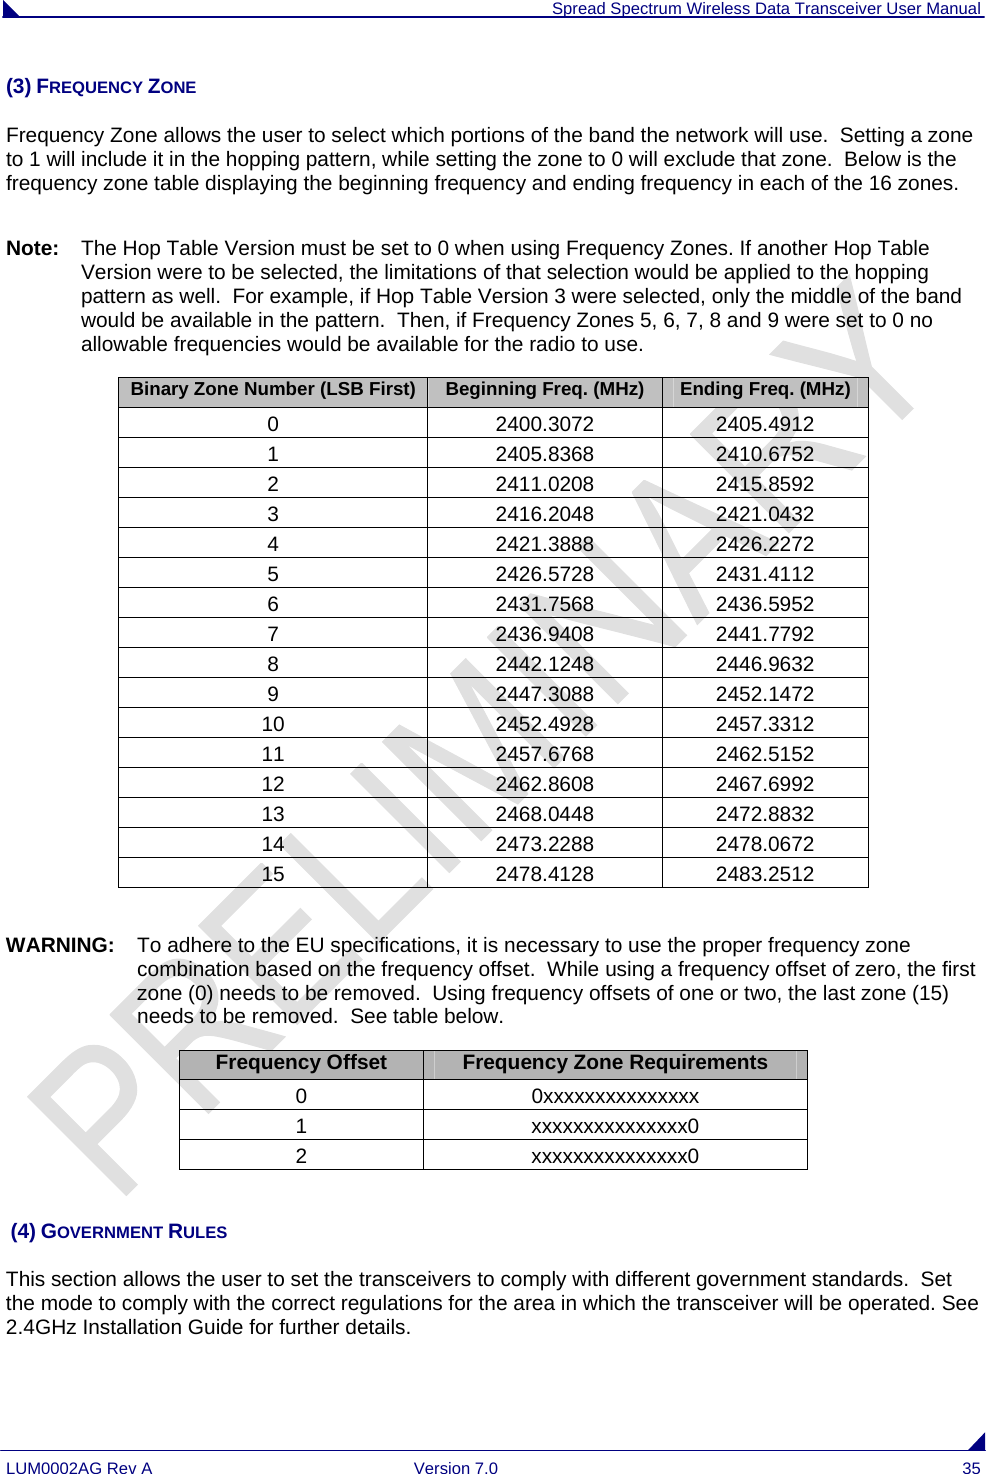  Spread Spectrum Wireless Data Transceiver User Manual LUM0002AG Rev A  Version 7.0  35 (3) FREQUENCY ZONE Frequency Zone allows the user to select which portions of the band the network will use.  Setting a zone to 1 will include it in the hopping pattern, while setting the zone to 0 will exclude that zone.  Below is the frequency zone table displaying the beginning frequency and ending frequency in each of the 16 zones.  Note:   The Hop Table Version must be set to 0 when using Frequency Zones. If another Hop Table Version were to be selected, the limitations of that selection would be applied to the hopping pattern as well.  For example, if Hop Table Version 3 were selected, only the middle of the band would be available in the pattern.  Then, if Frequency Zones 5, 6, 7, 8 and 9 were set to 0 no allowable frequencies would be available for the radio to use. Binary Zone Number (LSB First) Beginning Freq. (MHz) Ending Freq. (MHz) 0 2400.3072 2405.4912 1 2405.8368 2410.6752 2 2411.0208 2415.8592 3 2416.2048 2421.0432 4 2421.3888 2426.2272 5 2426.5728 2431.4112 6 2431.7568 2436.5952 7 2436.9408 2441.7792 8 2442.1248 2446.9632 9 2447.3088 2452.1472 10 2452.4928 2457.3312 11 2457.6768 2462.5152 12 2462.8608 2467.6992 13 2468.0448 2472.8832 14 2473.2288 2478.0672 15 2478.4128 2483.2512  WARNING:  To adhere to the EU specifications, it is necessary to use the proper frequency zone combination based on the frequency offset.  While using a frequency offset of zero, the first zone (0) needs to be removed.  Using frequency offsets of one or two, the last zone (15) needs to be removed.  See table below.  Frequency Offset  Frequency Zone Requirements 0 0xxxxxxxxxxxxxxx 1 xxxxxxxxxxxxxxx0 2 xxxxxxxxxxxxxxx0    (4) GOVERNMENT RULES This section allows the user to set the transceivers to comply with different government standards.  Set the mode to comply with the correct regulations for the area in which the transceiver will be operated. See 2.4GHz Installation Guide for further details. 